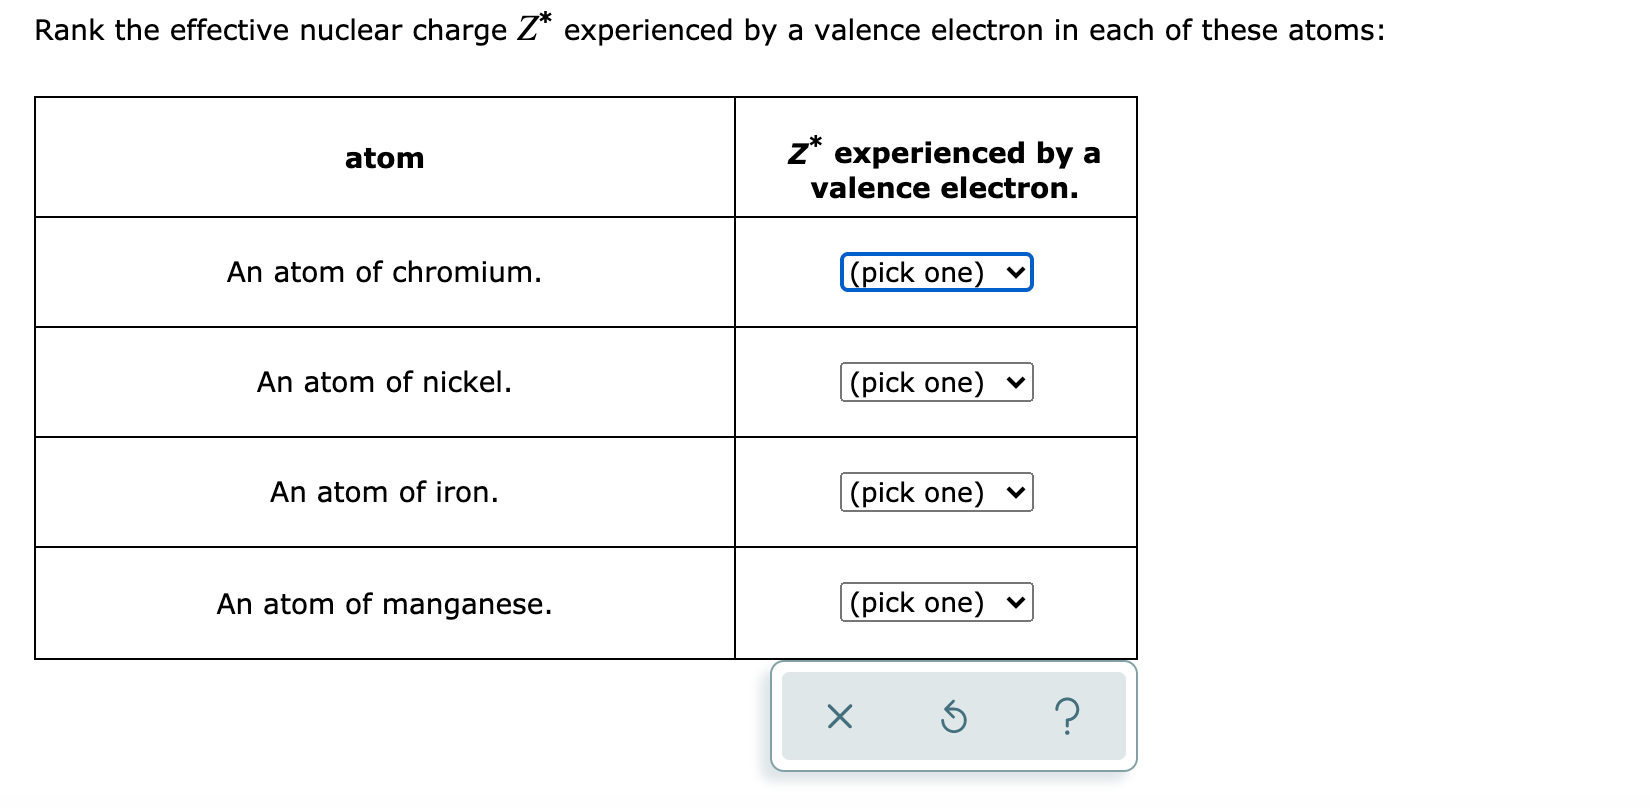 Rank the effective nuclear charge Z* experienced by a valence electron in each of these atoms:
atom
z* experienced by a
valence electron.
An atom of chromium.
(pick one)
An atom of nickel.
(pick one) v
An atom of iron.
|(pick one)
An atom of manganese.
(pick one) v
